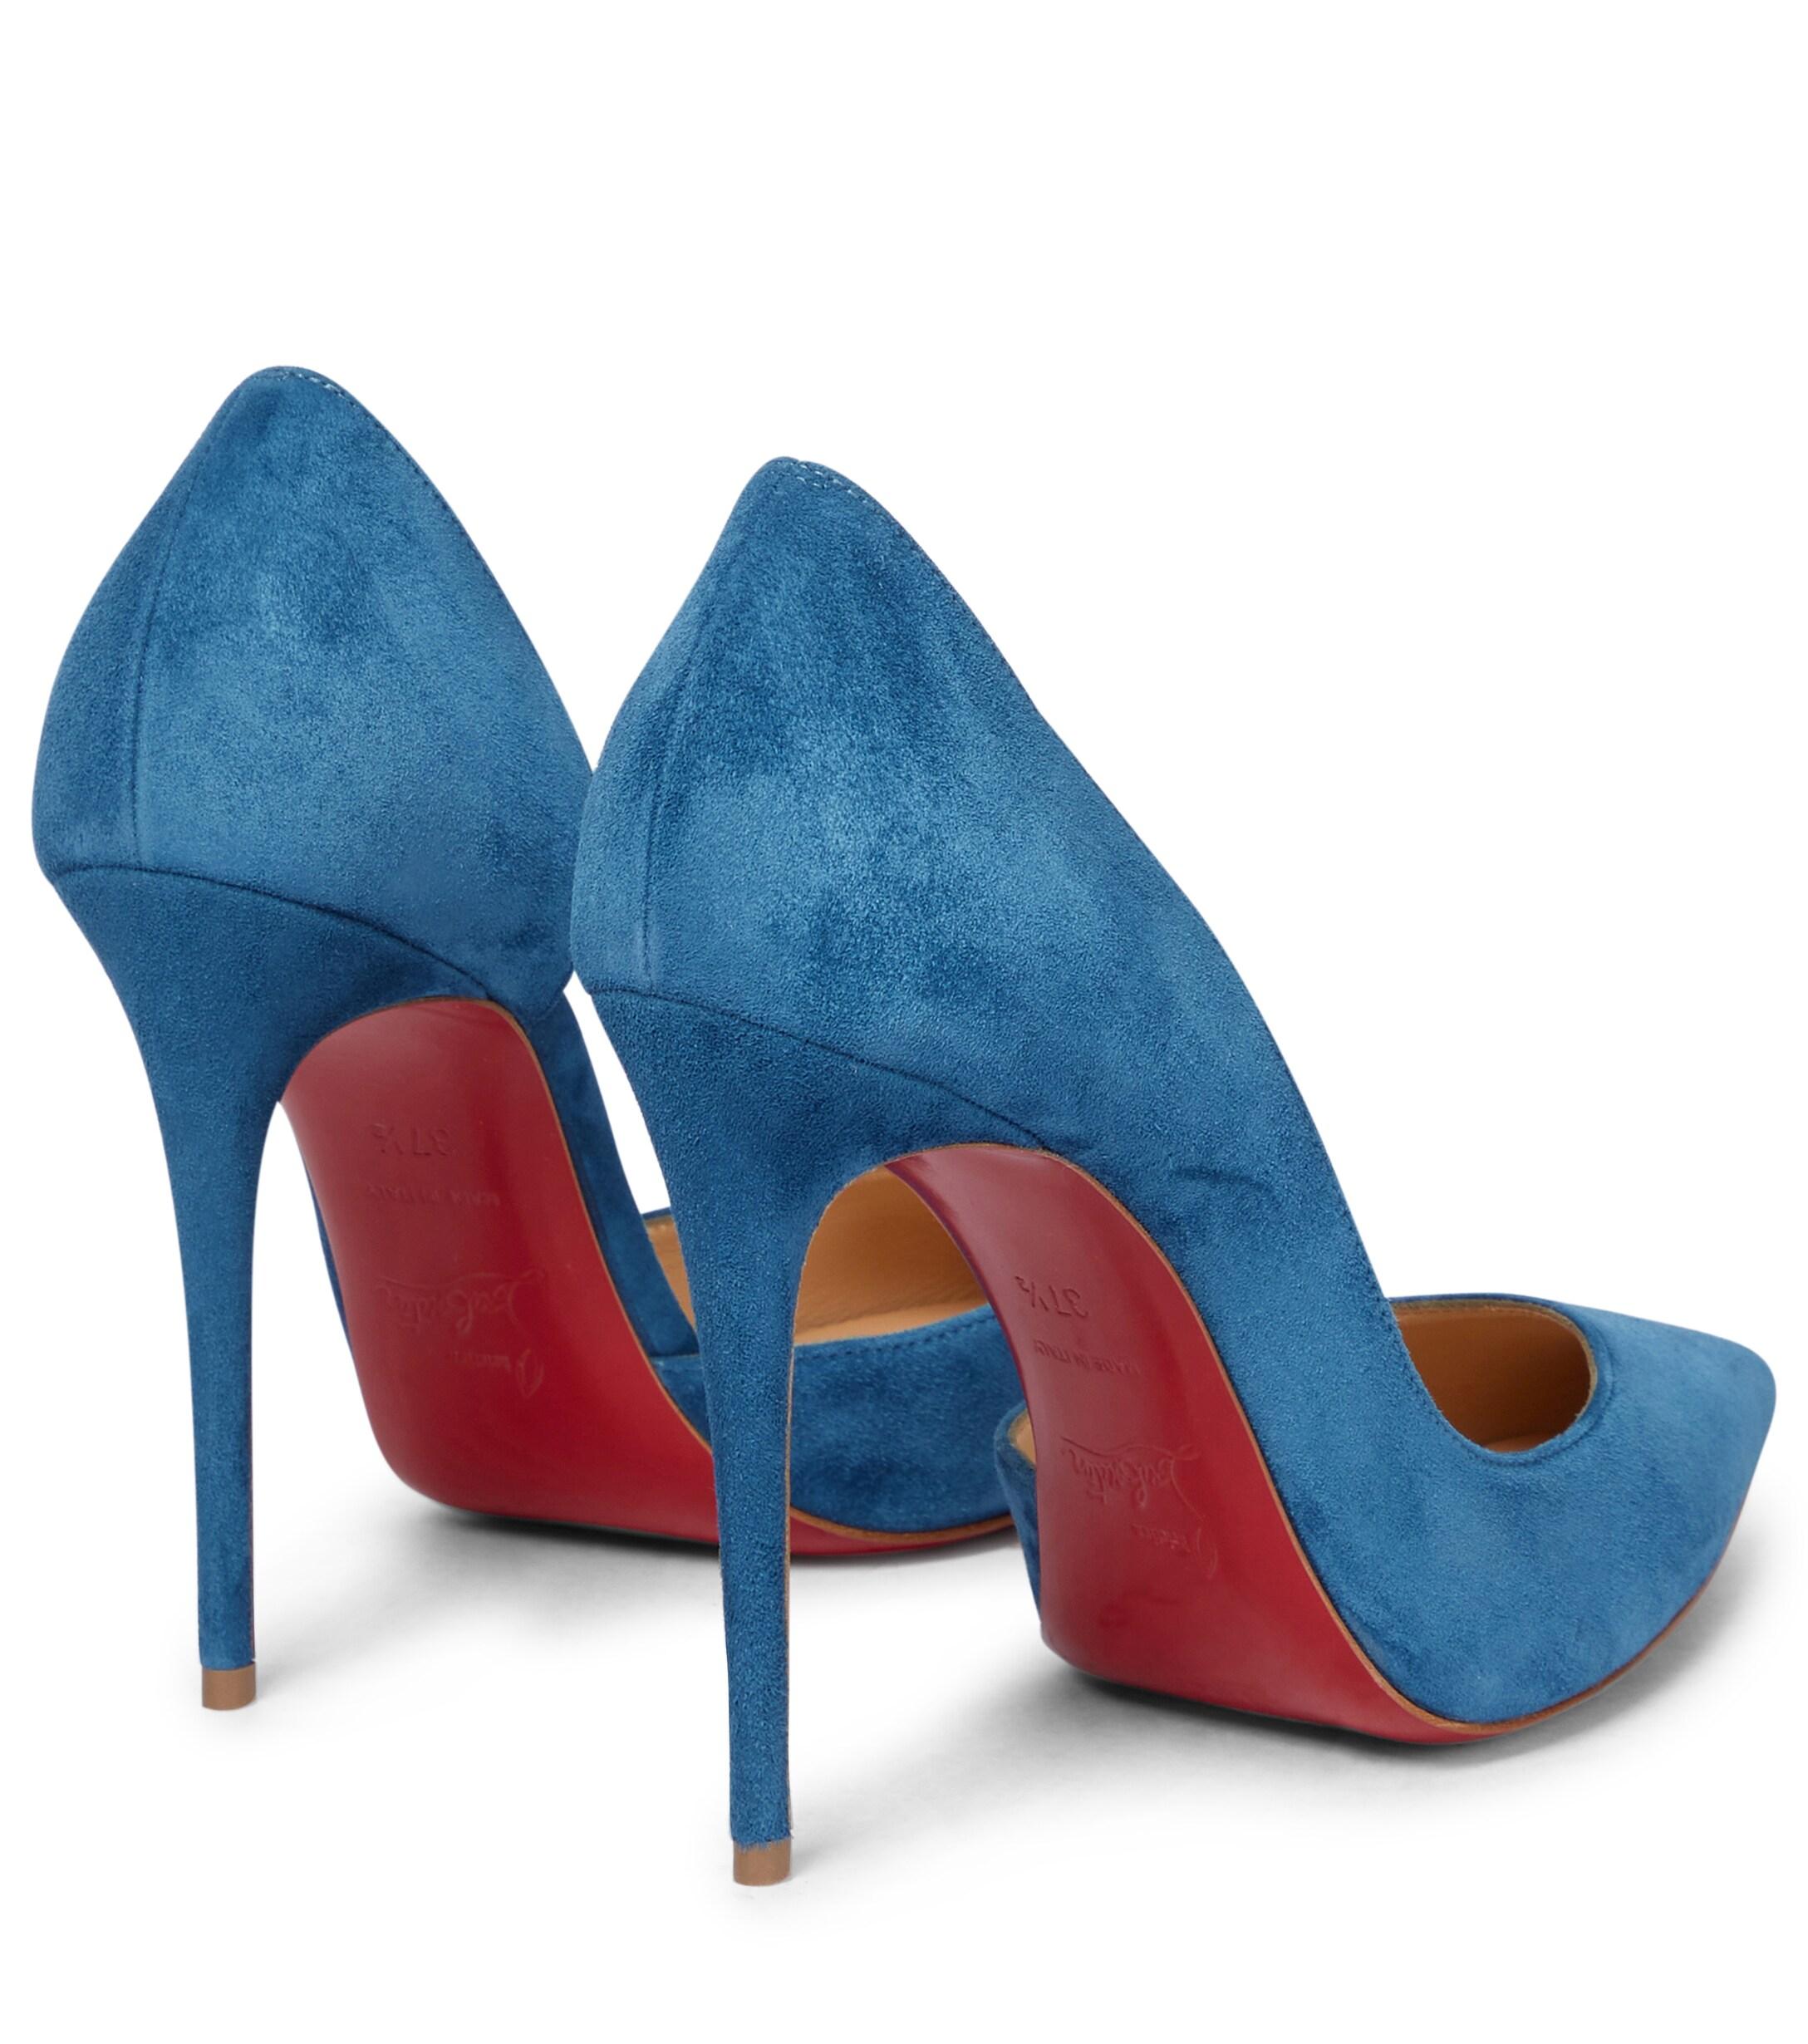 Christian Louboutin Iriza 100 Suede Pumps in Blue | Lyst